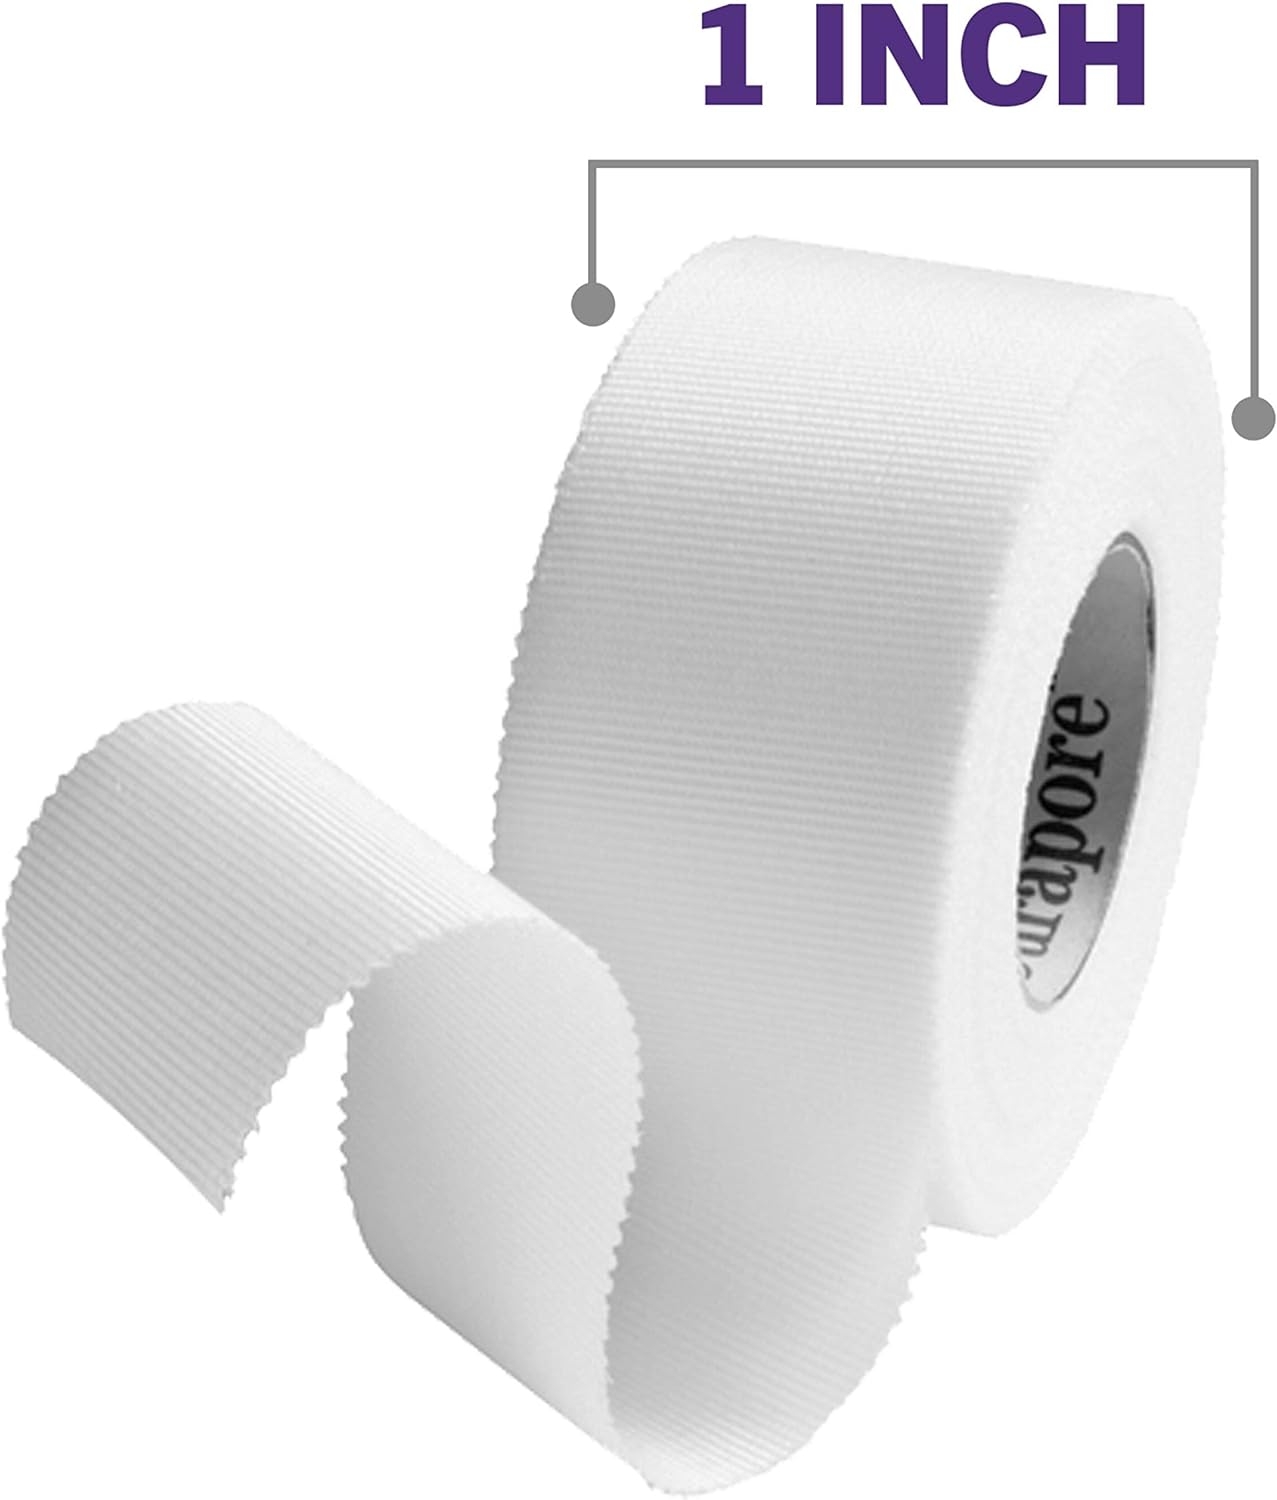 Nexcare Durable Cloth First Aid Tape, Tears Easily, 1 Roll